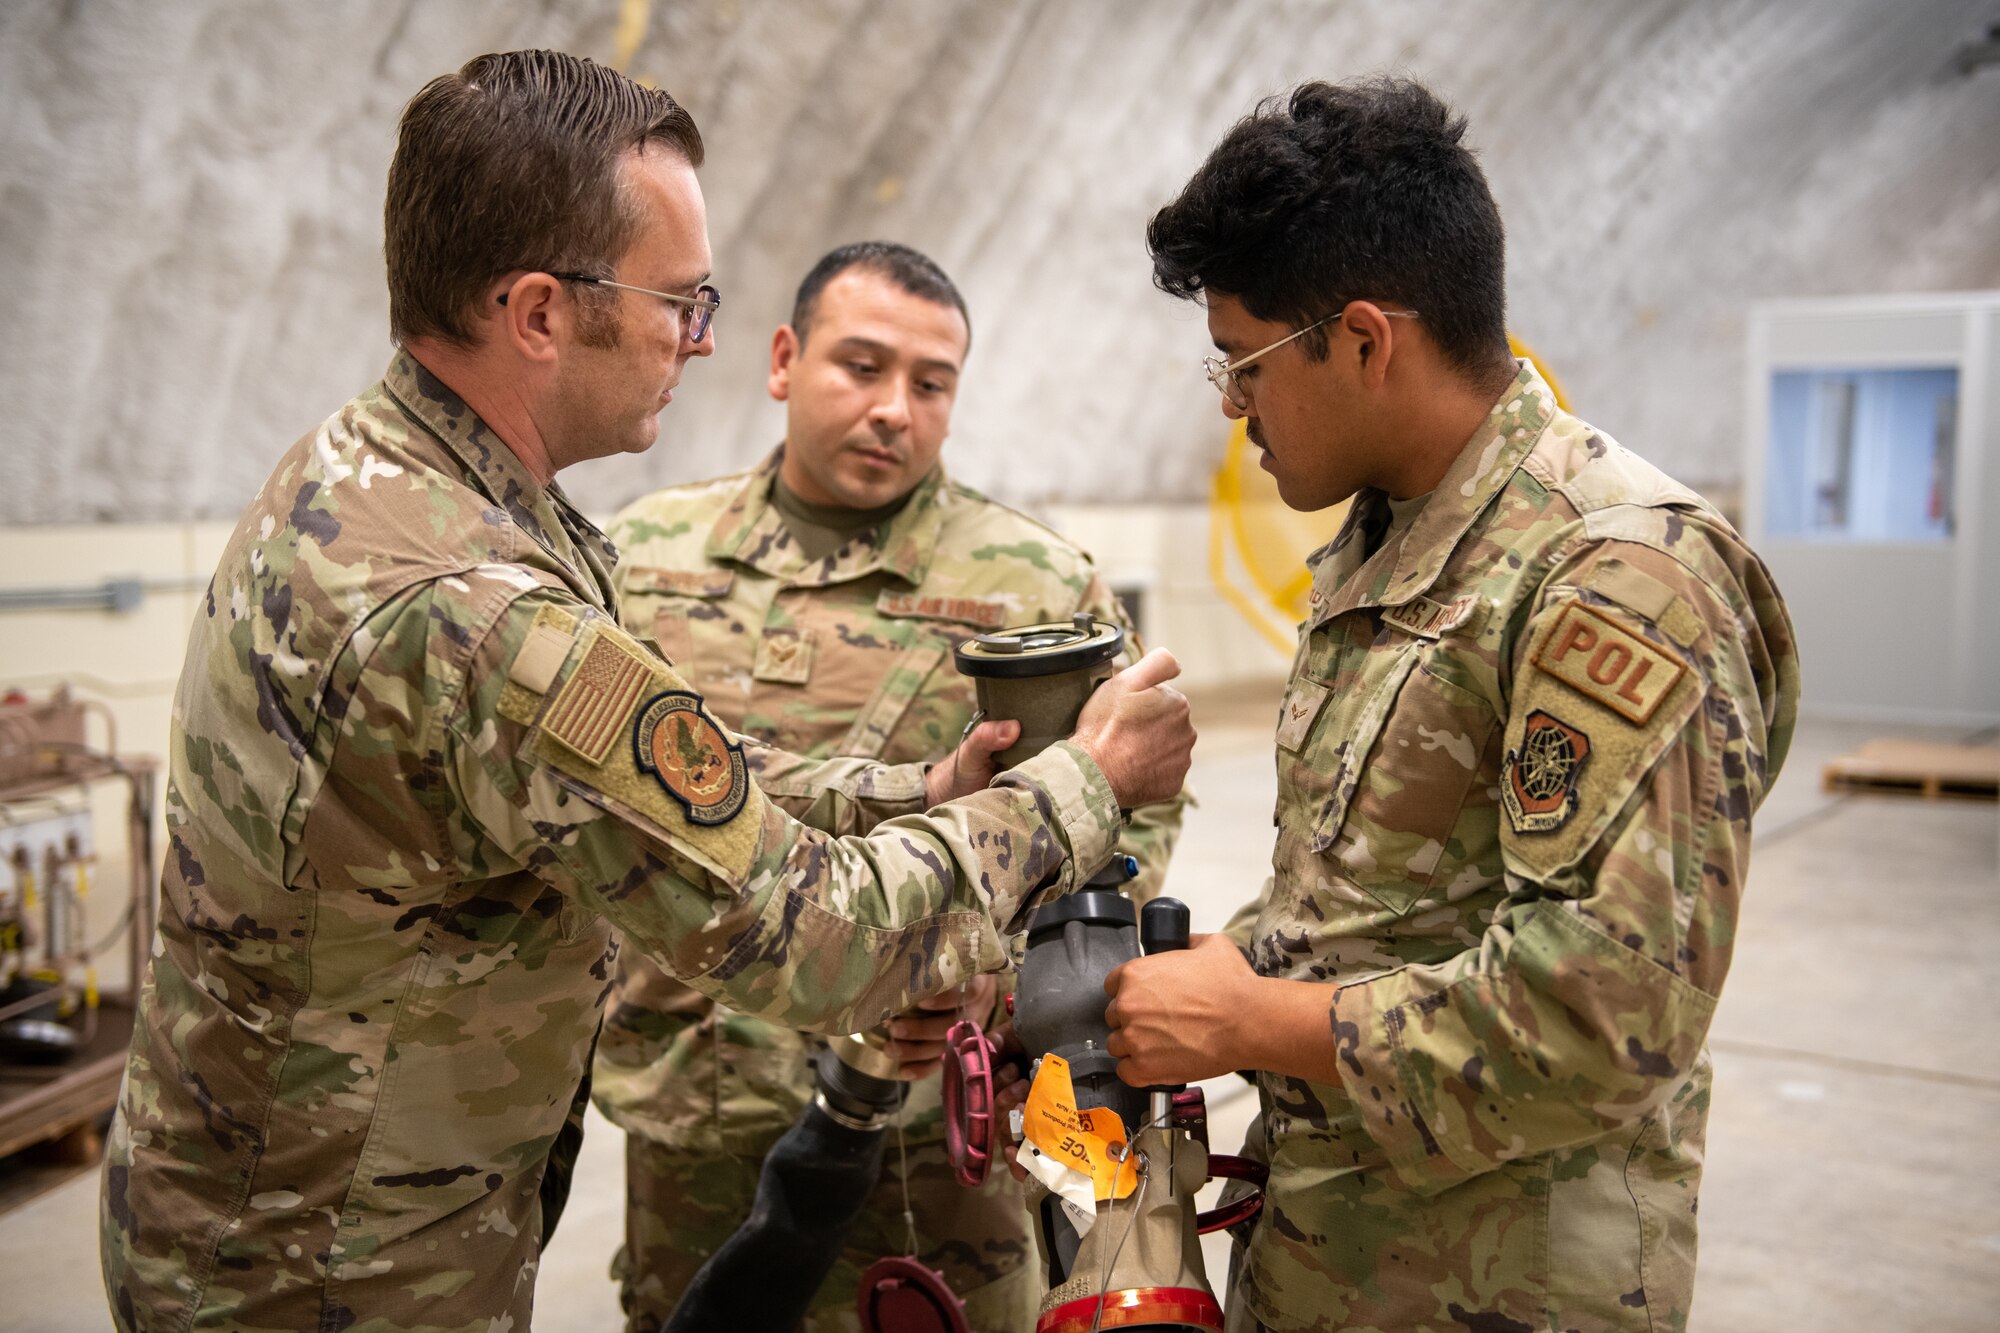 Master Sgt. Matt Yunker, 18th Logisitics Readiness Squadron chief of fuels operations, shows Senior Airman Felix Cruz and Airman 1st Class Ivan Herrera, 22nd LRS fuels distribution operators, how the Versatile Integrating Partner Equipment Refueling Kit would connect to a fuel hose during a hot pit refueling mission Oct. 13, 2022, at Kadena Air Base, Japan.